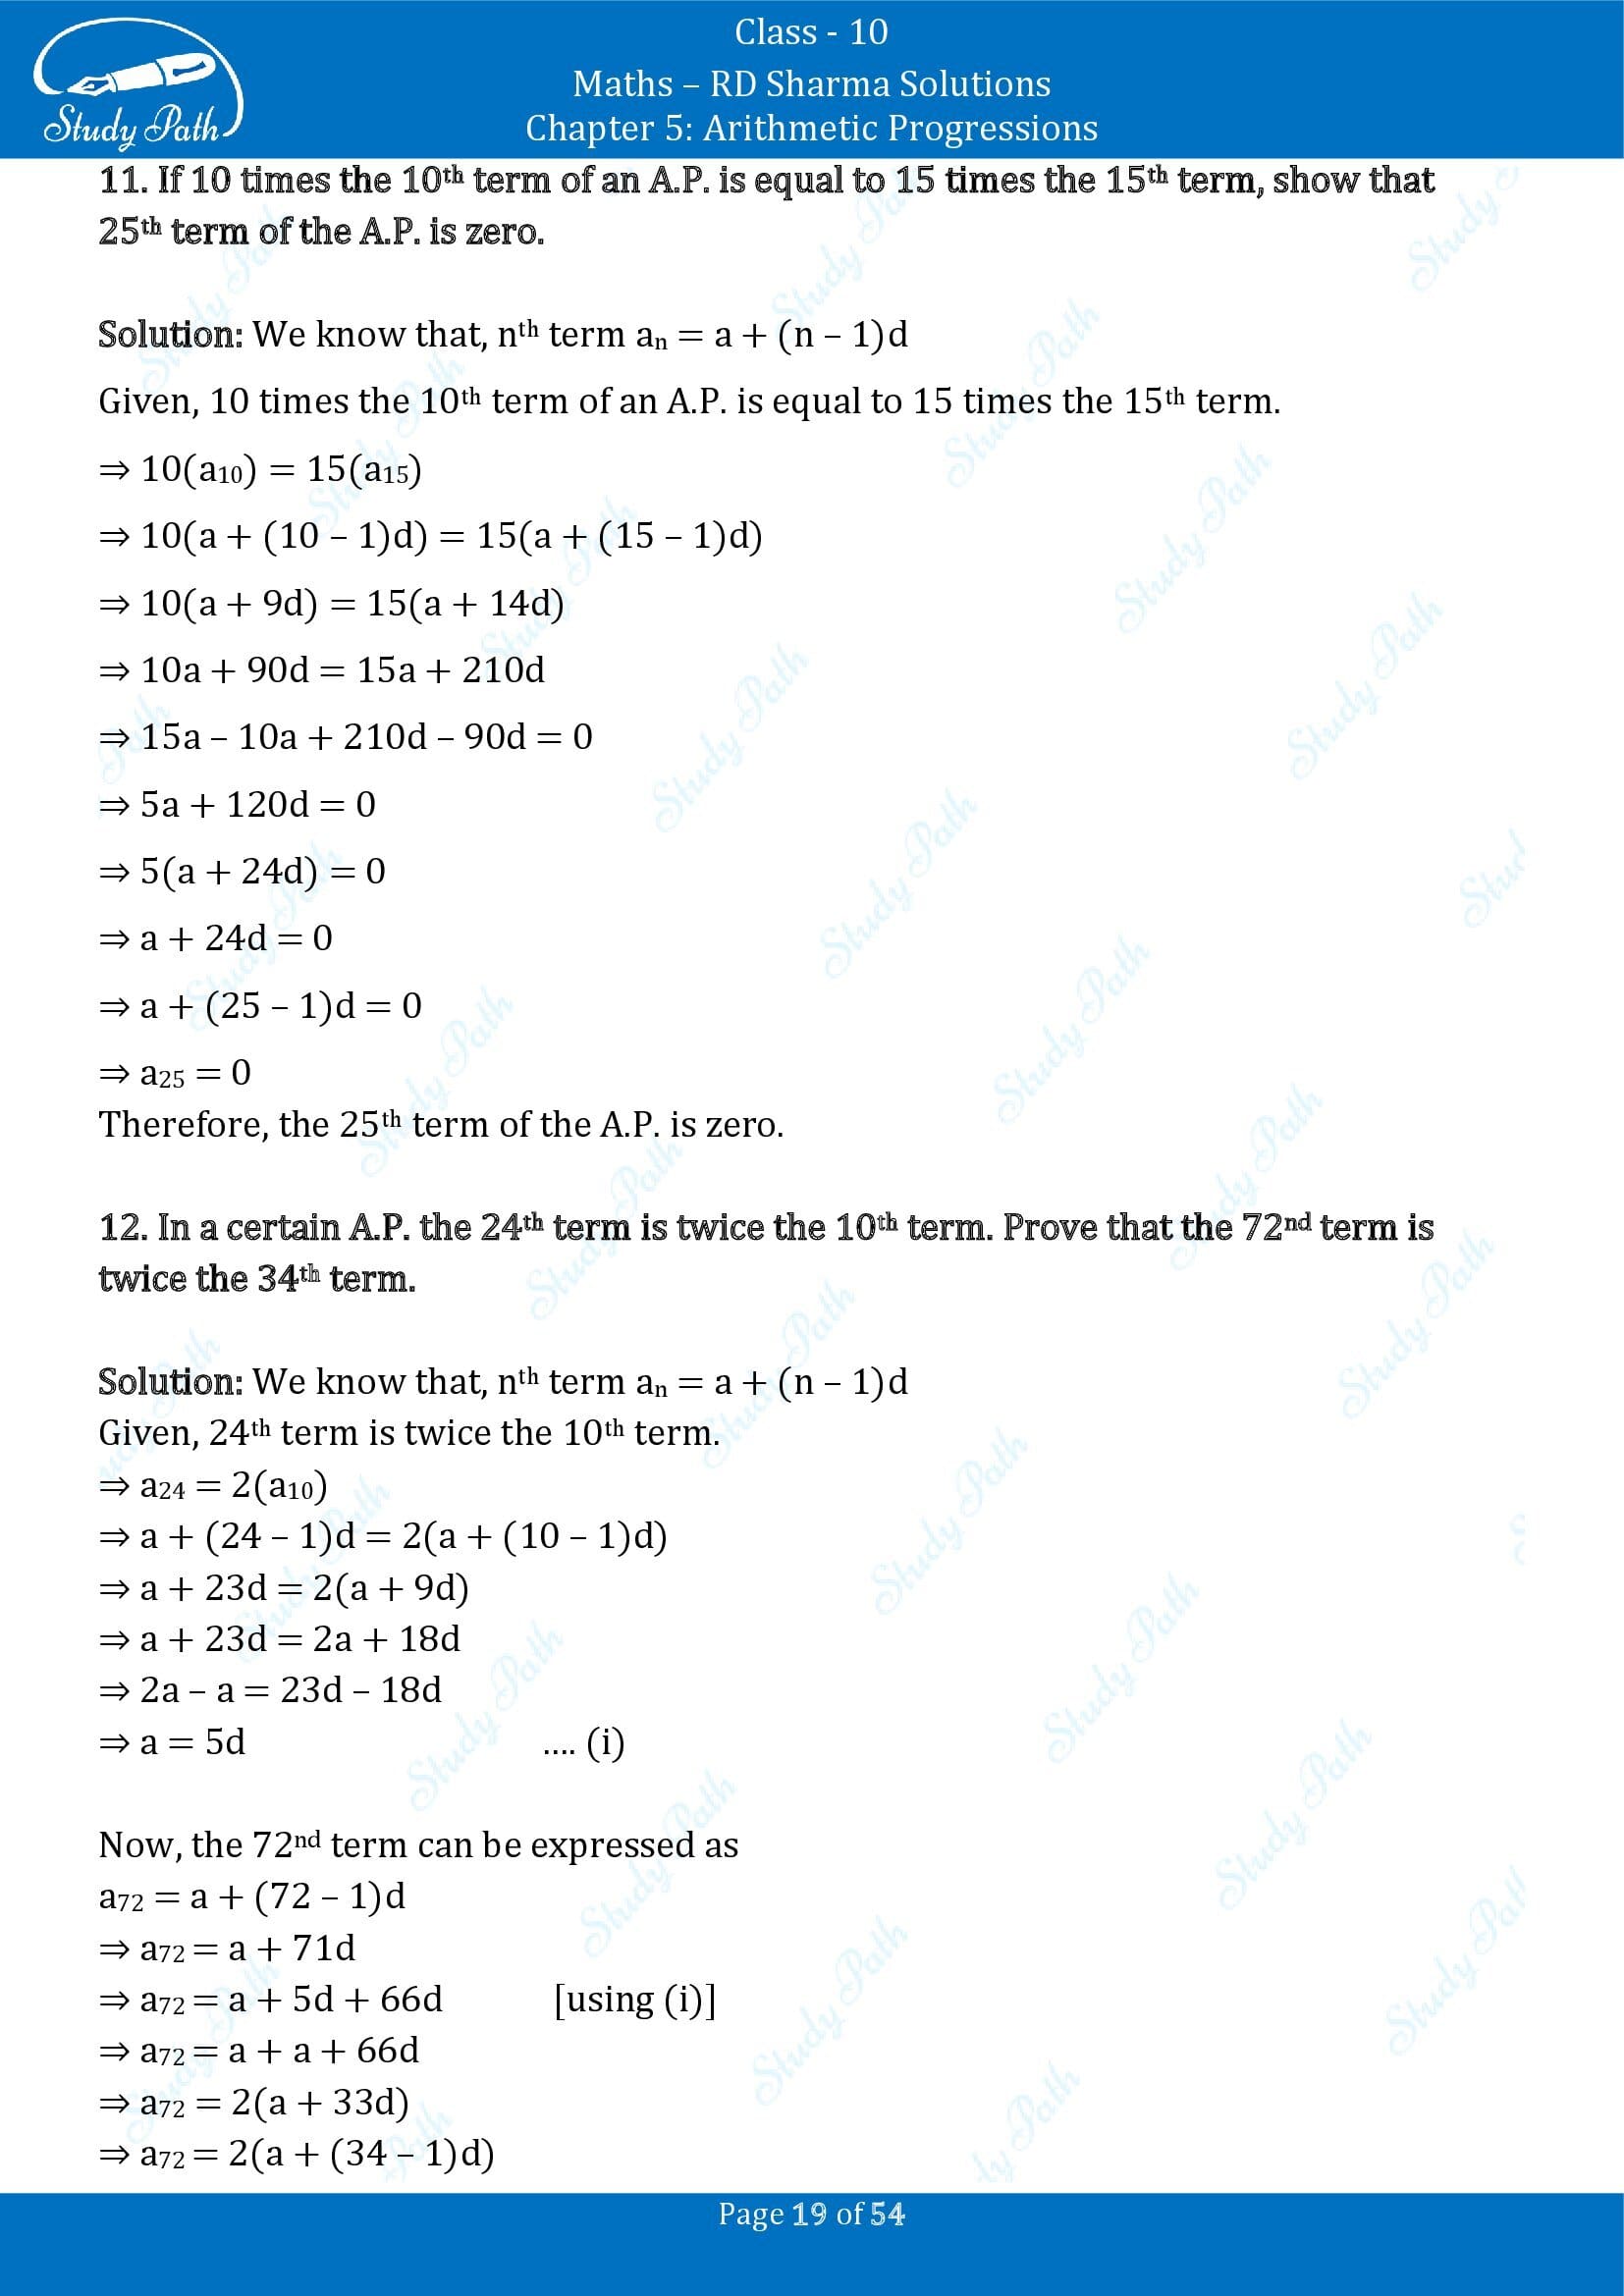 RD Sharma Solutions Class 10 Chapter 5 Arithmetic Progressions Exercise 5.4 00019